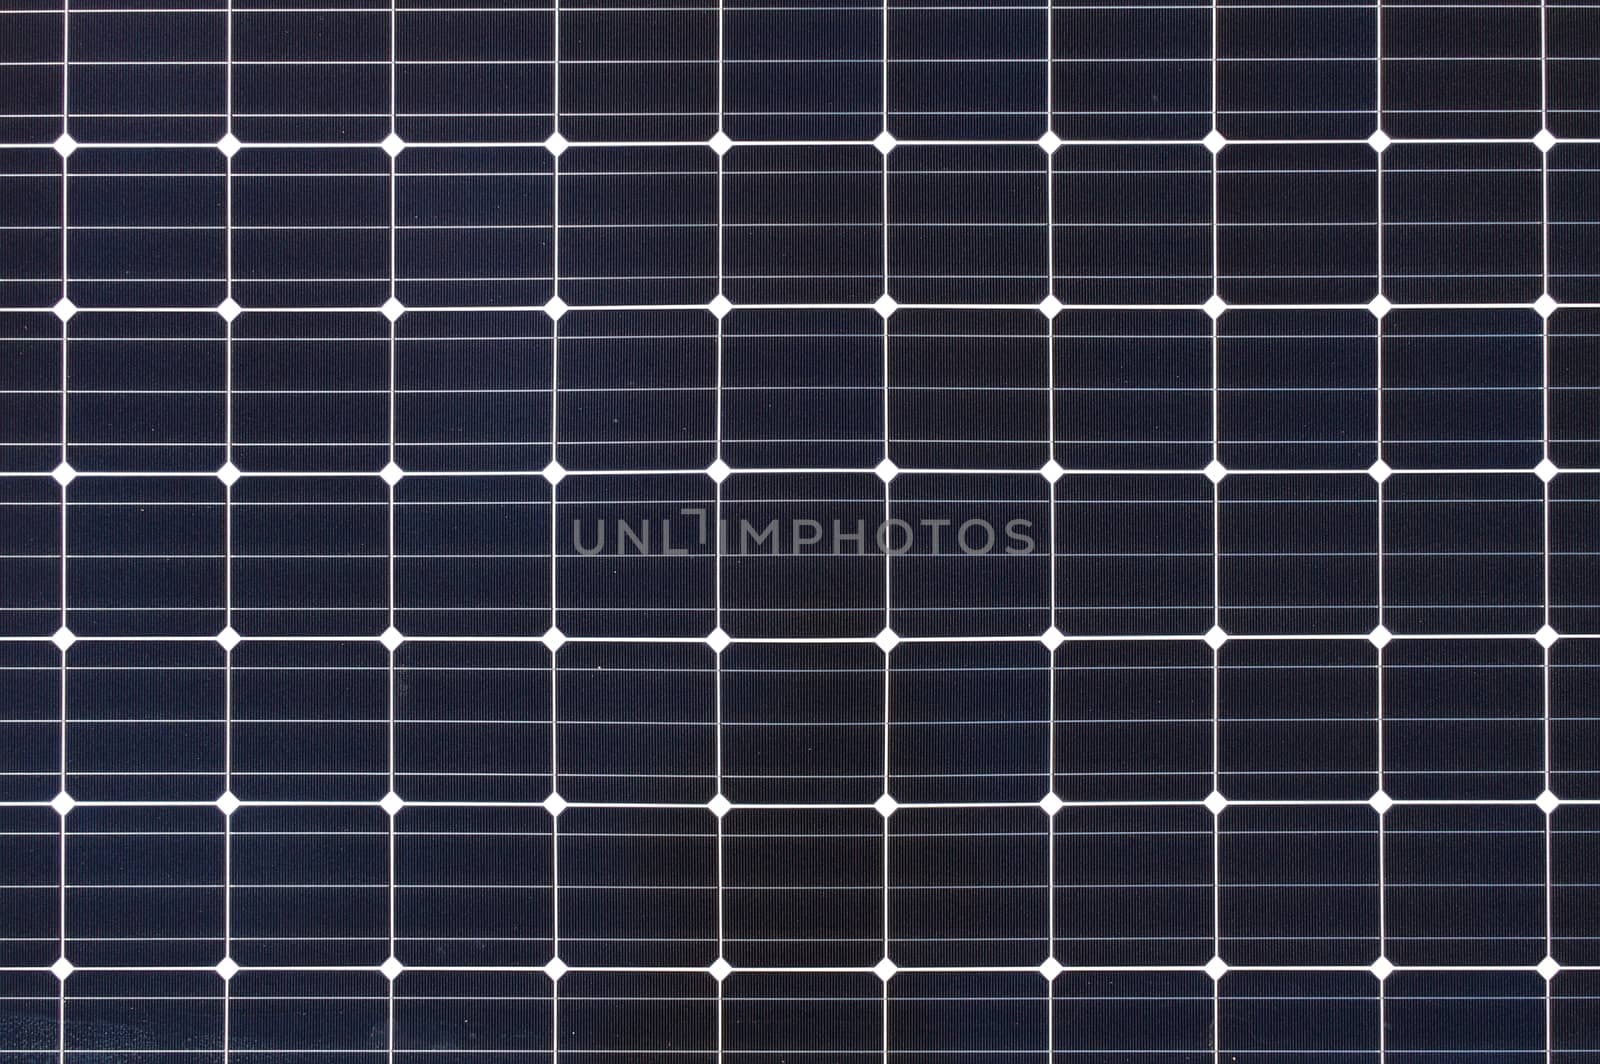 A pattern of square photovoltaic cells on the solar panel.